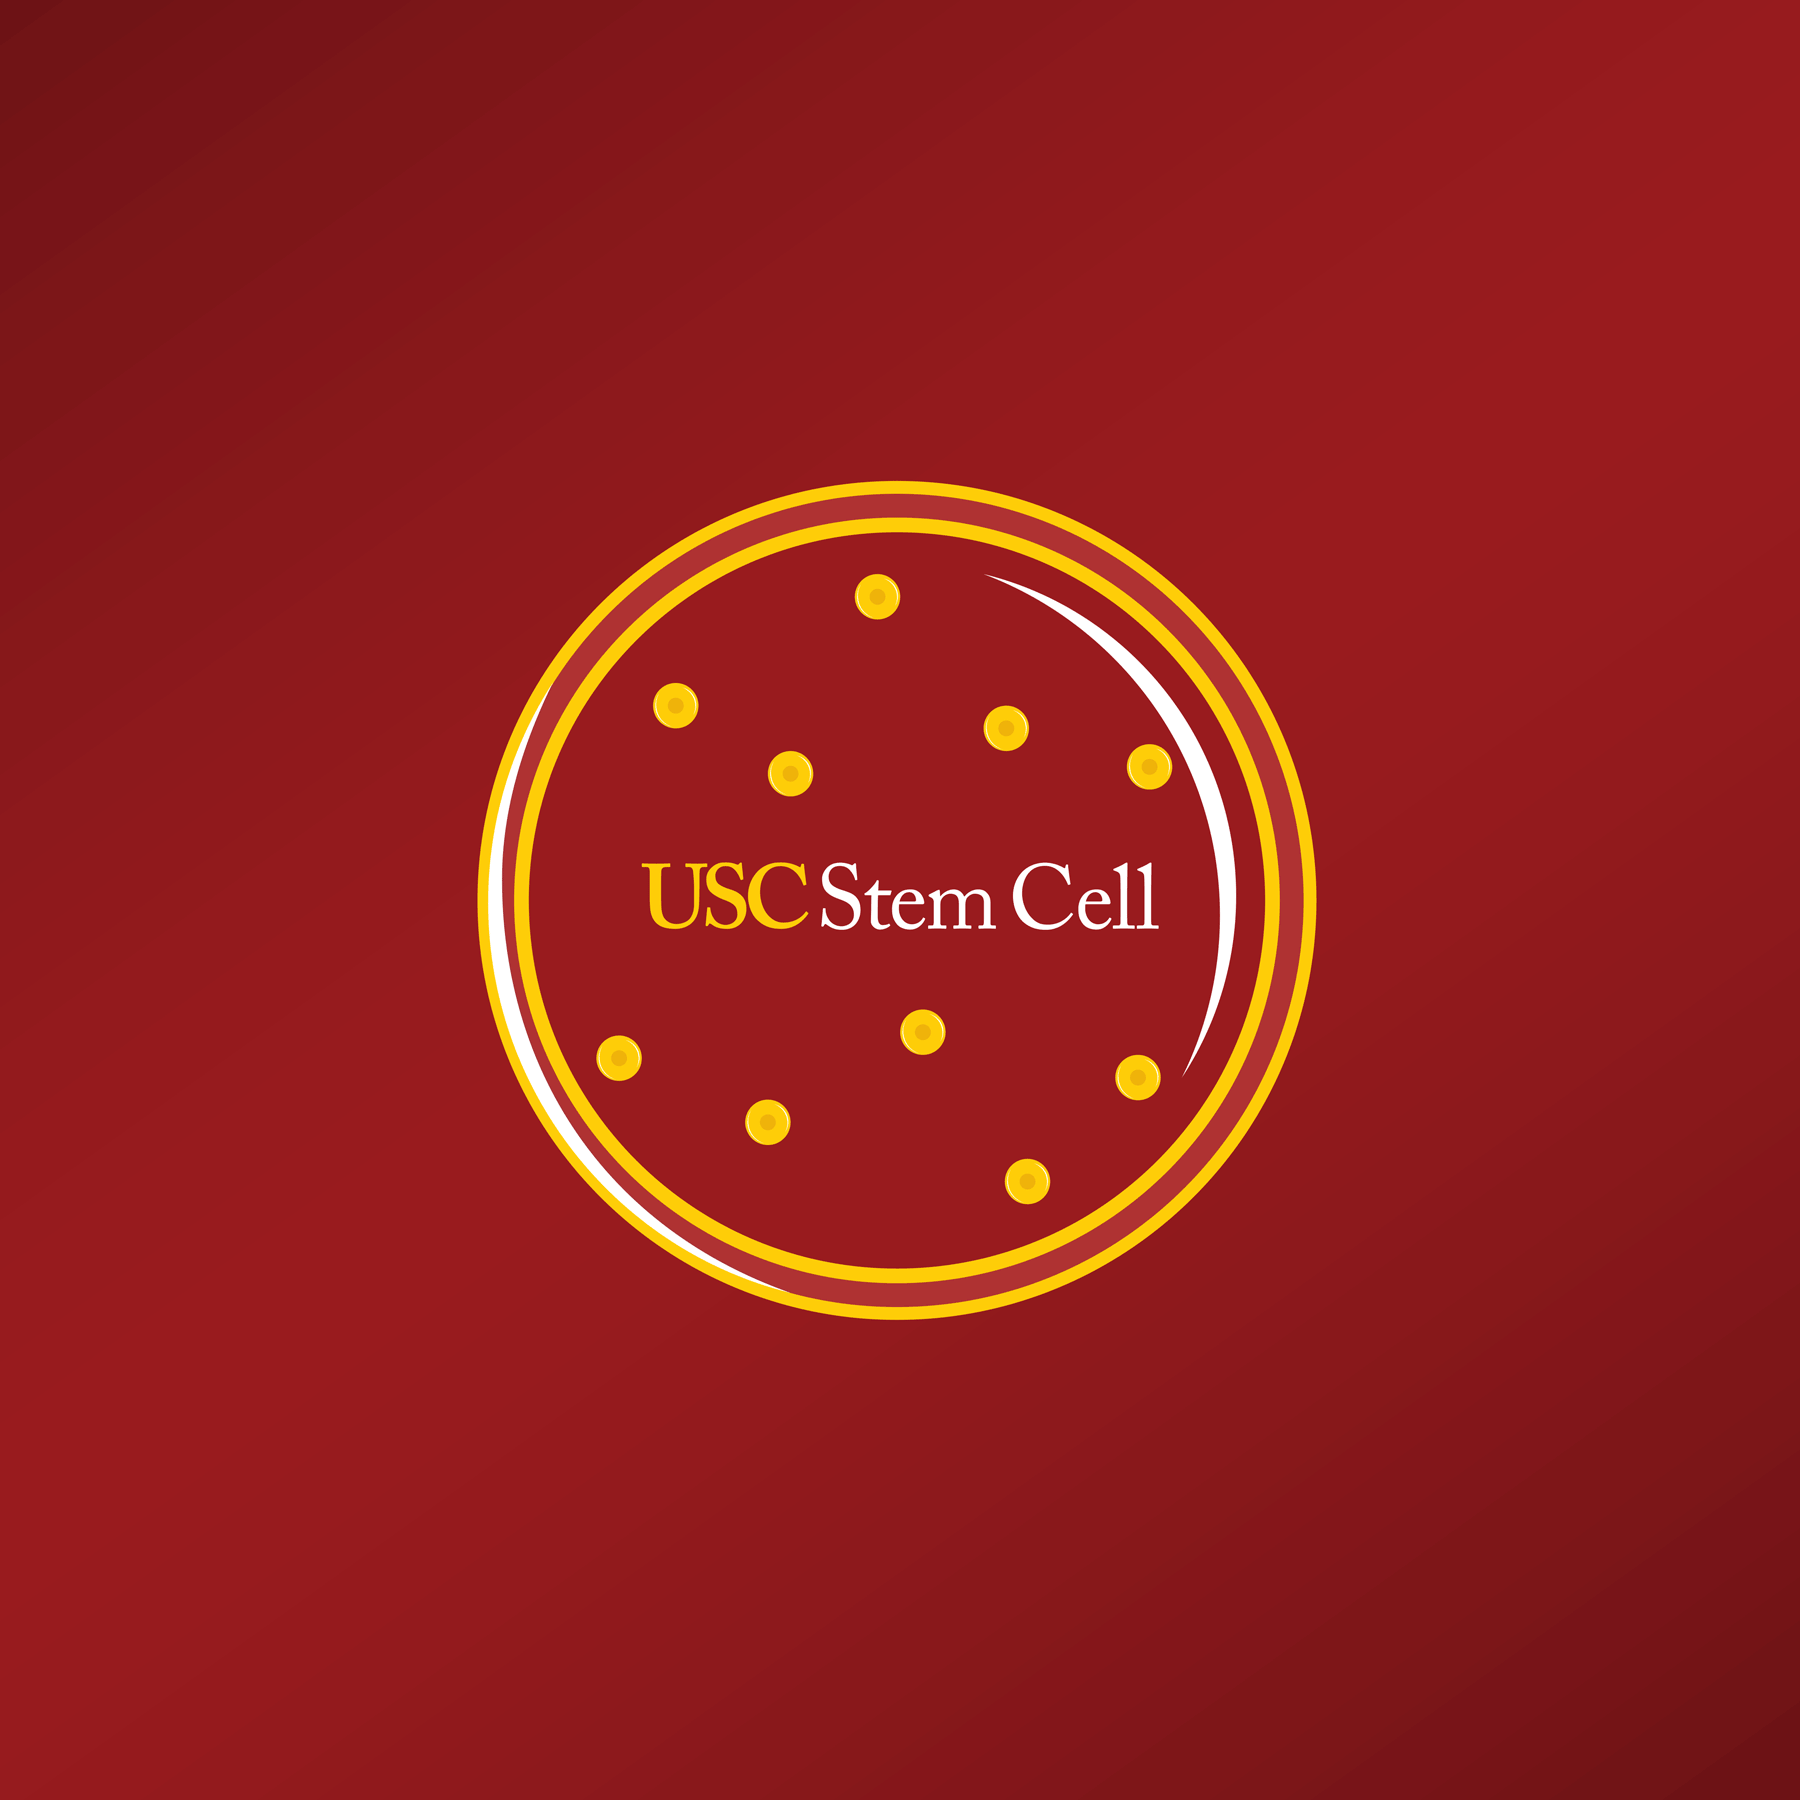 USC Stem Cell is accelerating treatments from Petri dish to patient for diseases affecting all organ systems throughout the body.